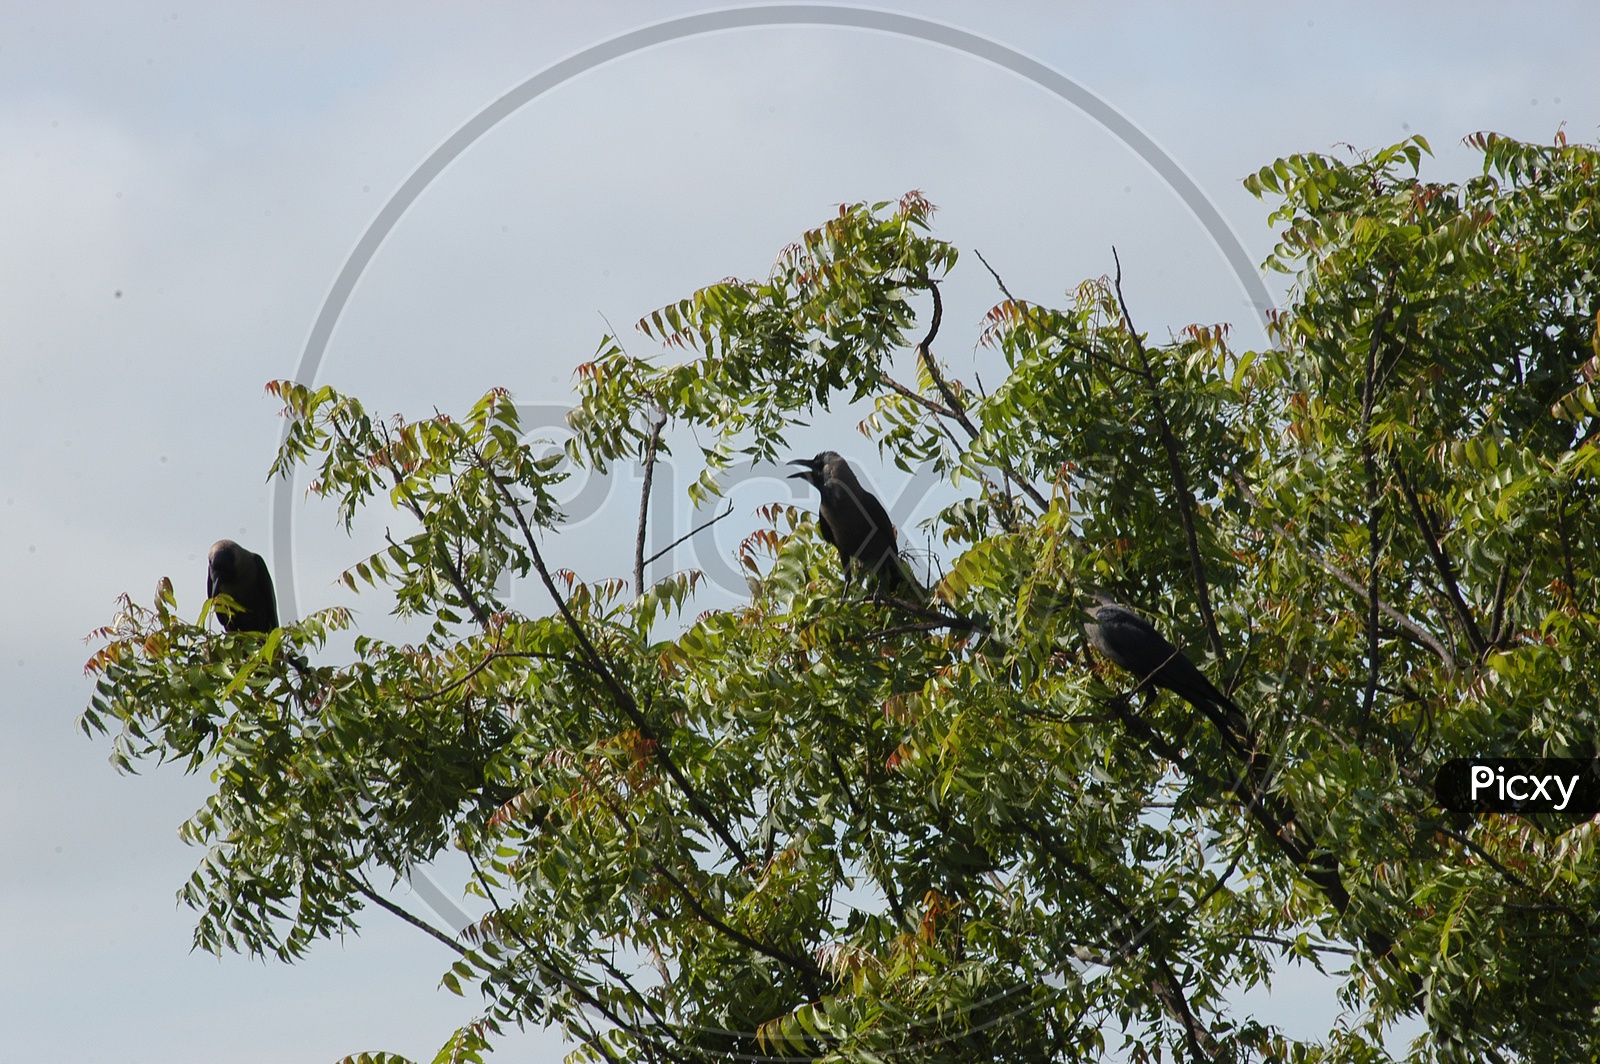 Crows on the branches of a neem tree